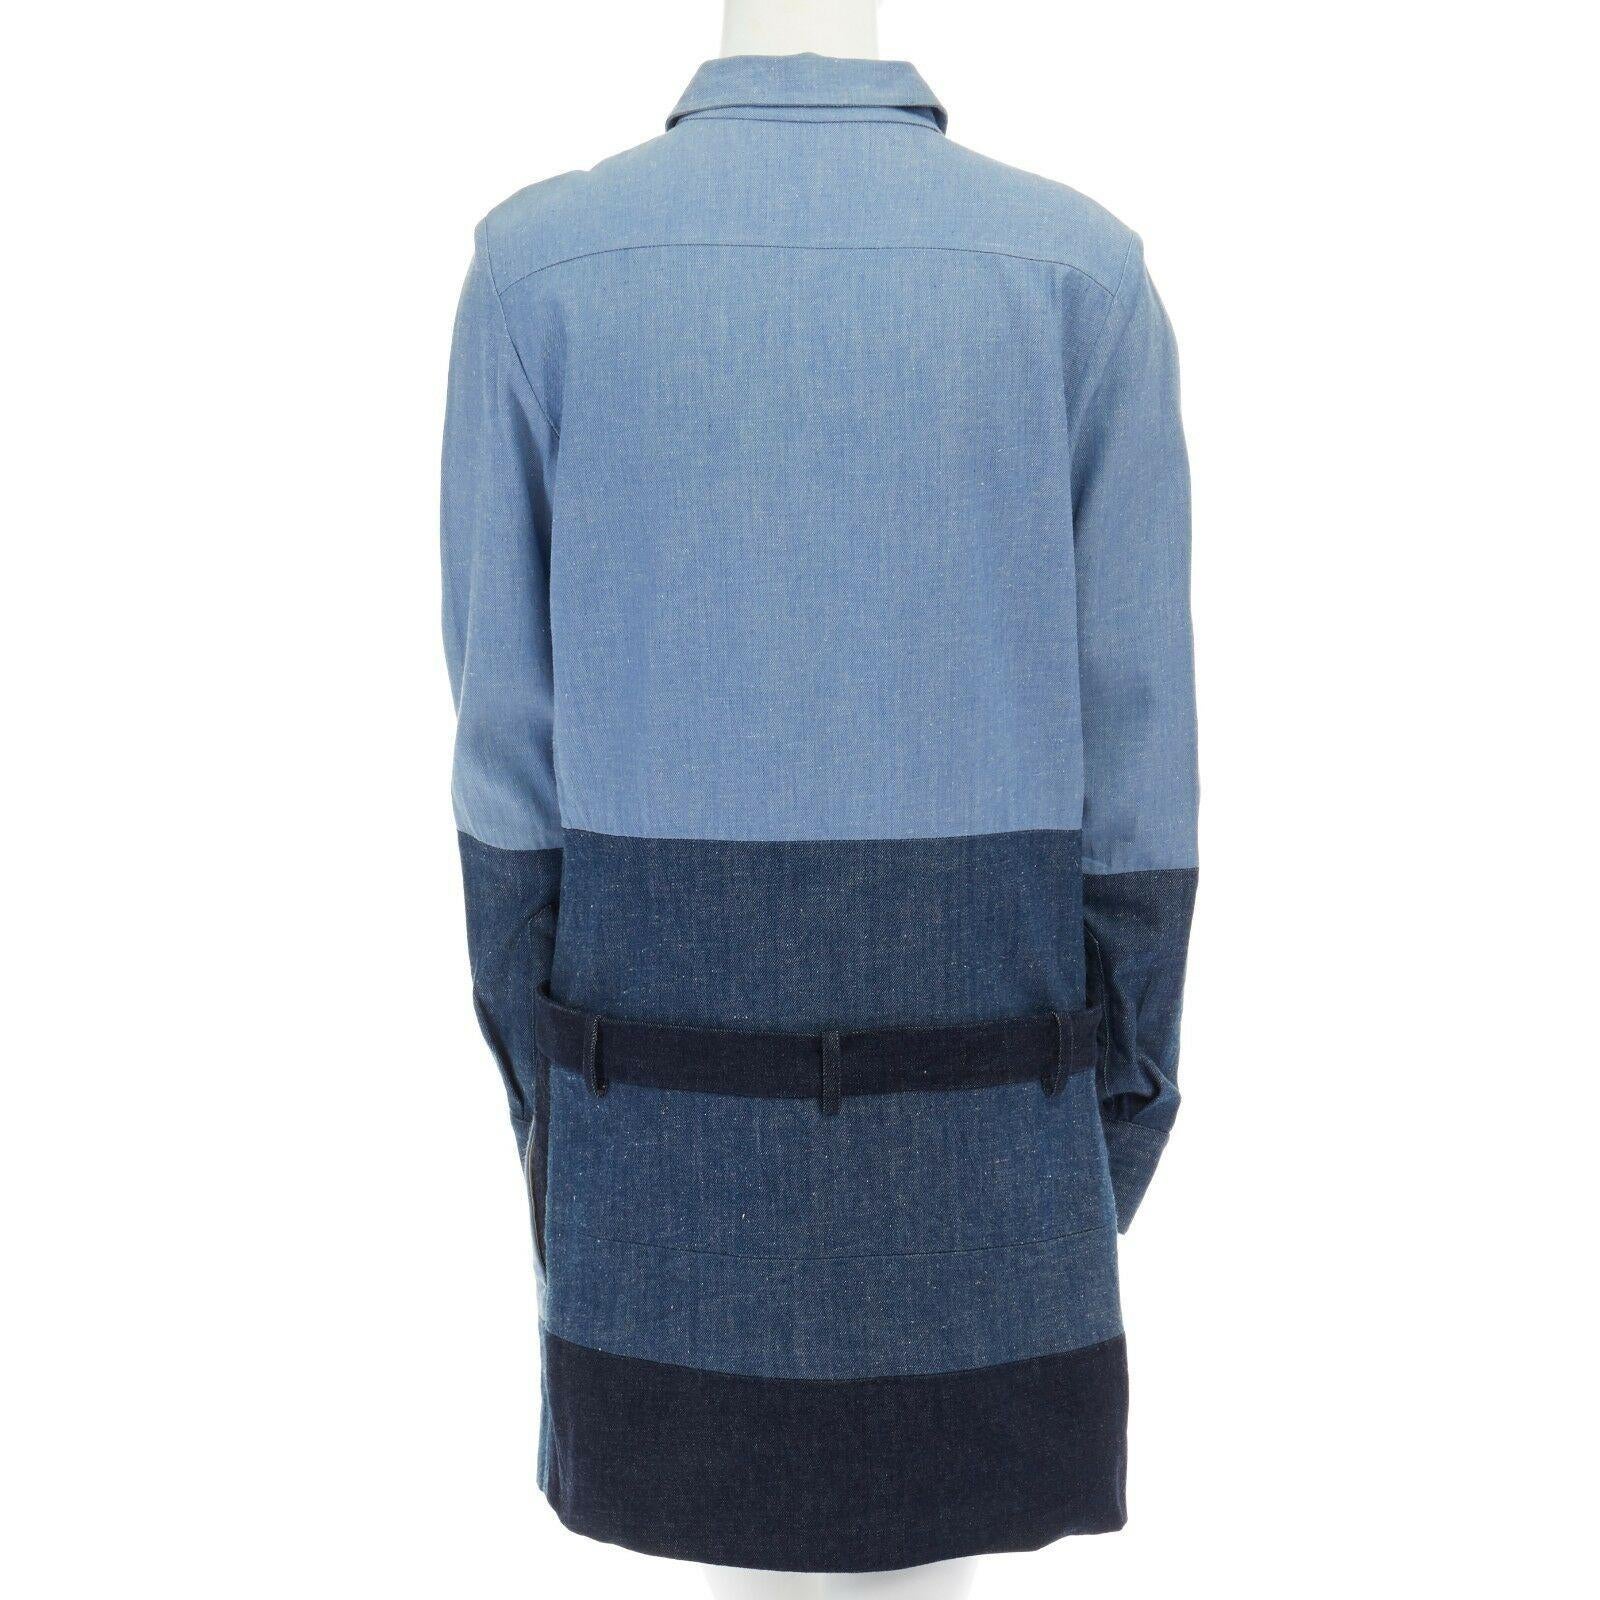 runway CELINE PHILO blue mixed denim patchwork long sleeve mini dress FR38 M
CELINE BY PHOEBE PHILO
Cotton blend. 
Mixed denim fabric patchwork. 
Spread collar. 
Concealed button front closure. 
Hook bar and zip fly closure. 
Long sleeves. 
Dual